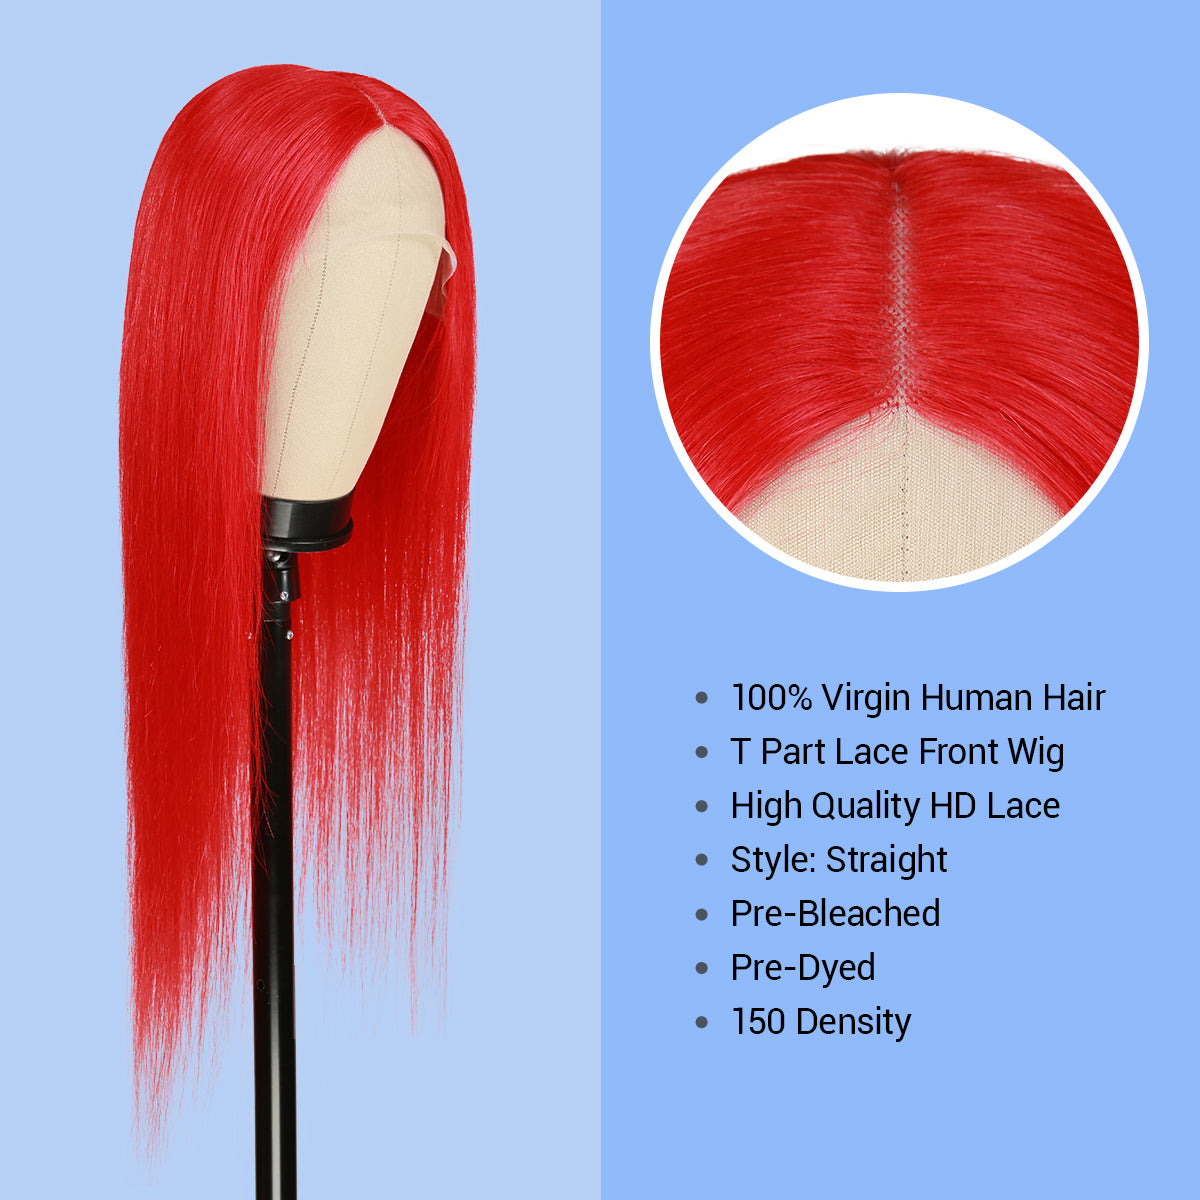 Human Hair, Lace Wig, T part, Deep part, Center Part, Middle Part, Long and Full, Natural Hairline, Straight, layered straight, HD Lace, Blonde, 613, Fancy Color, Red, Pre dyed, 100% Virgin Human Hair, High Quality HD Lace, Pre bleached, 150% density